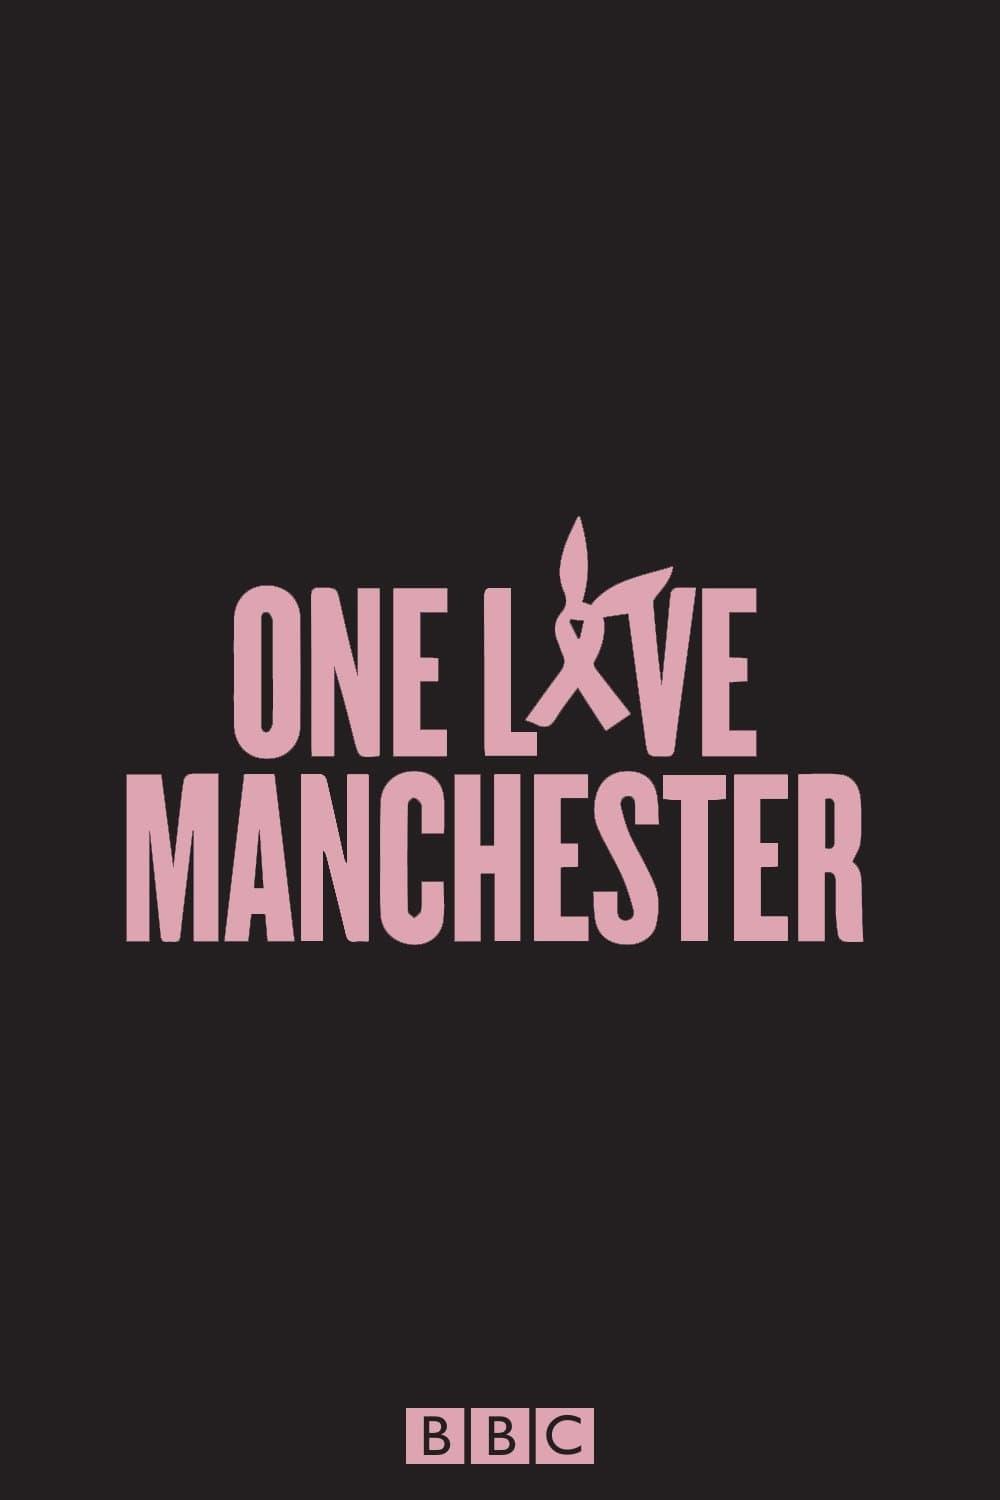 One Love Manchester poster